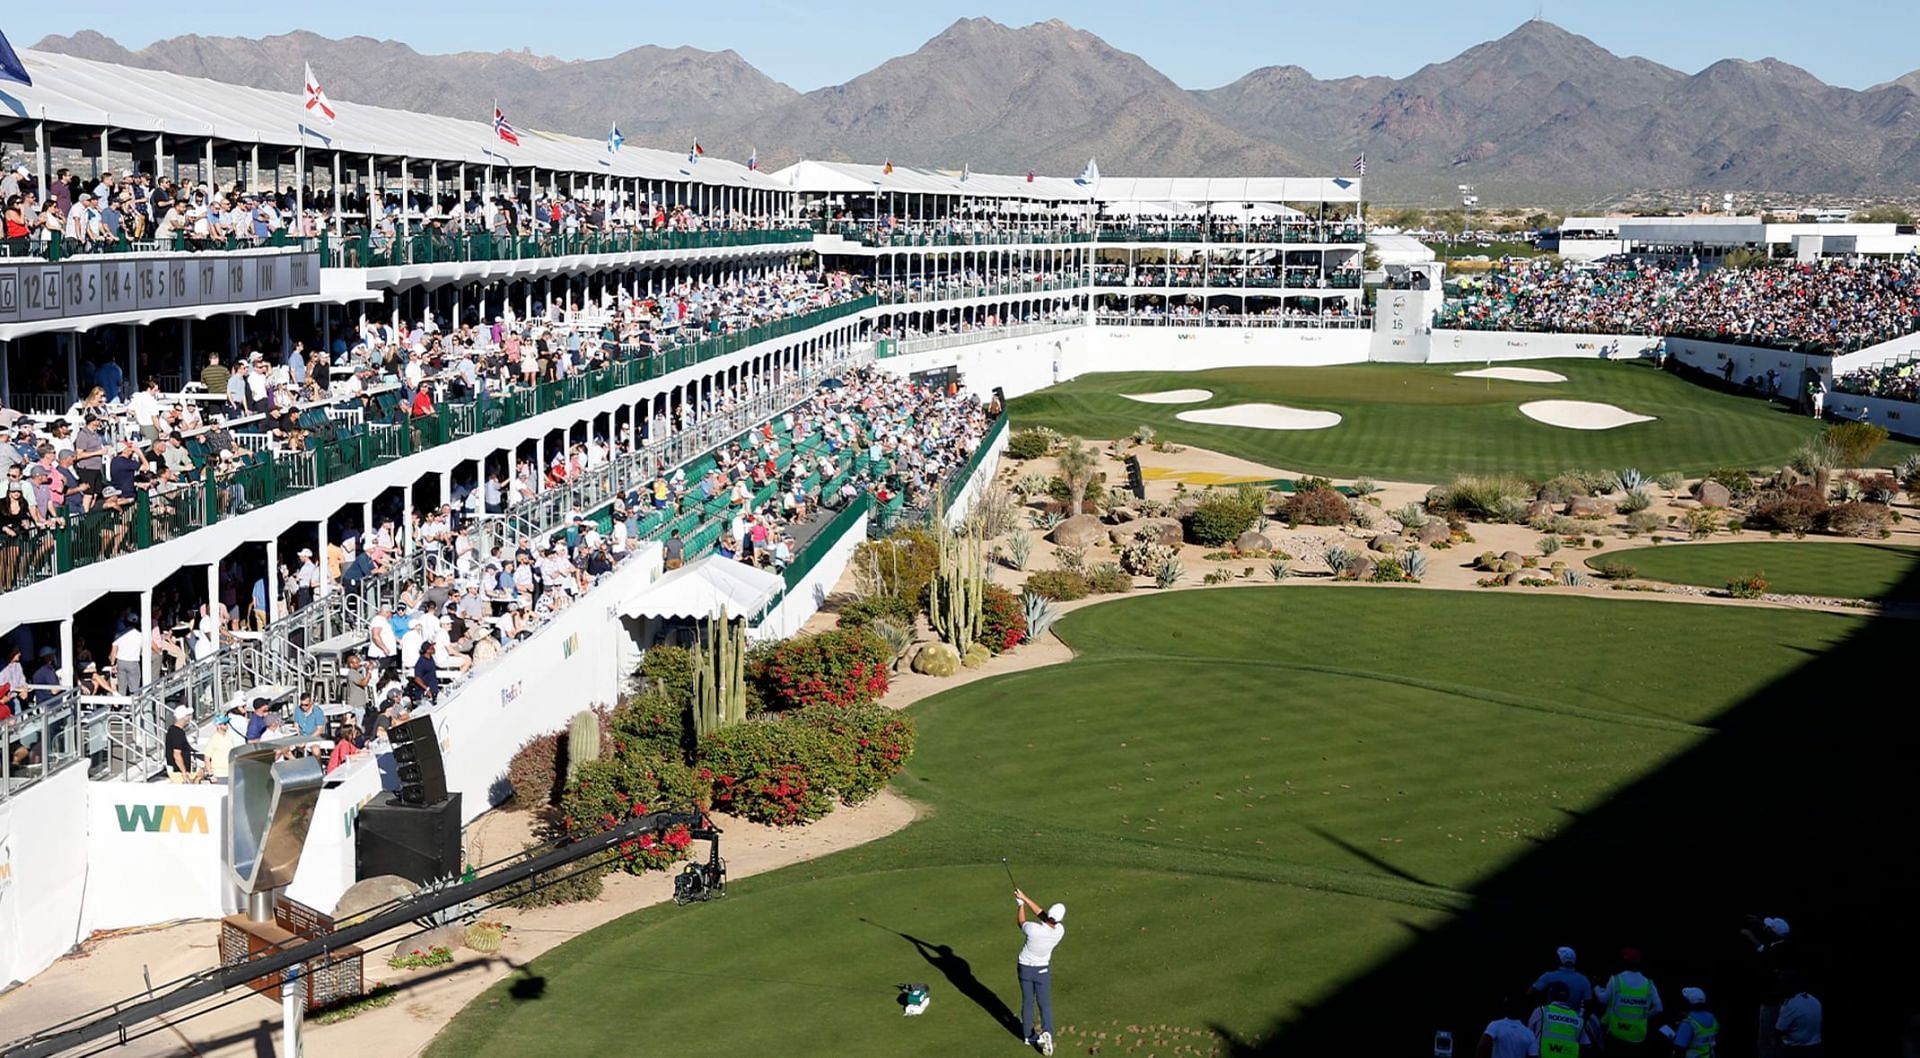 WM Phoenix Open will take begin from the Thursday February 9th